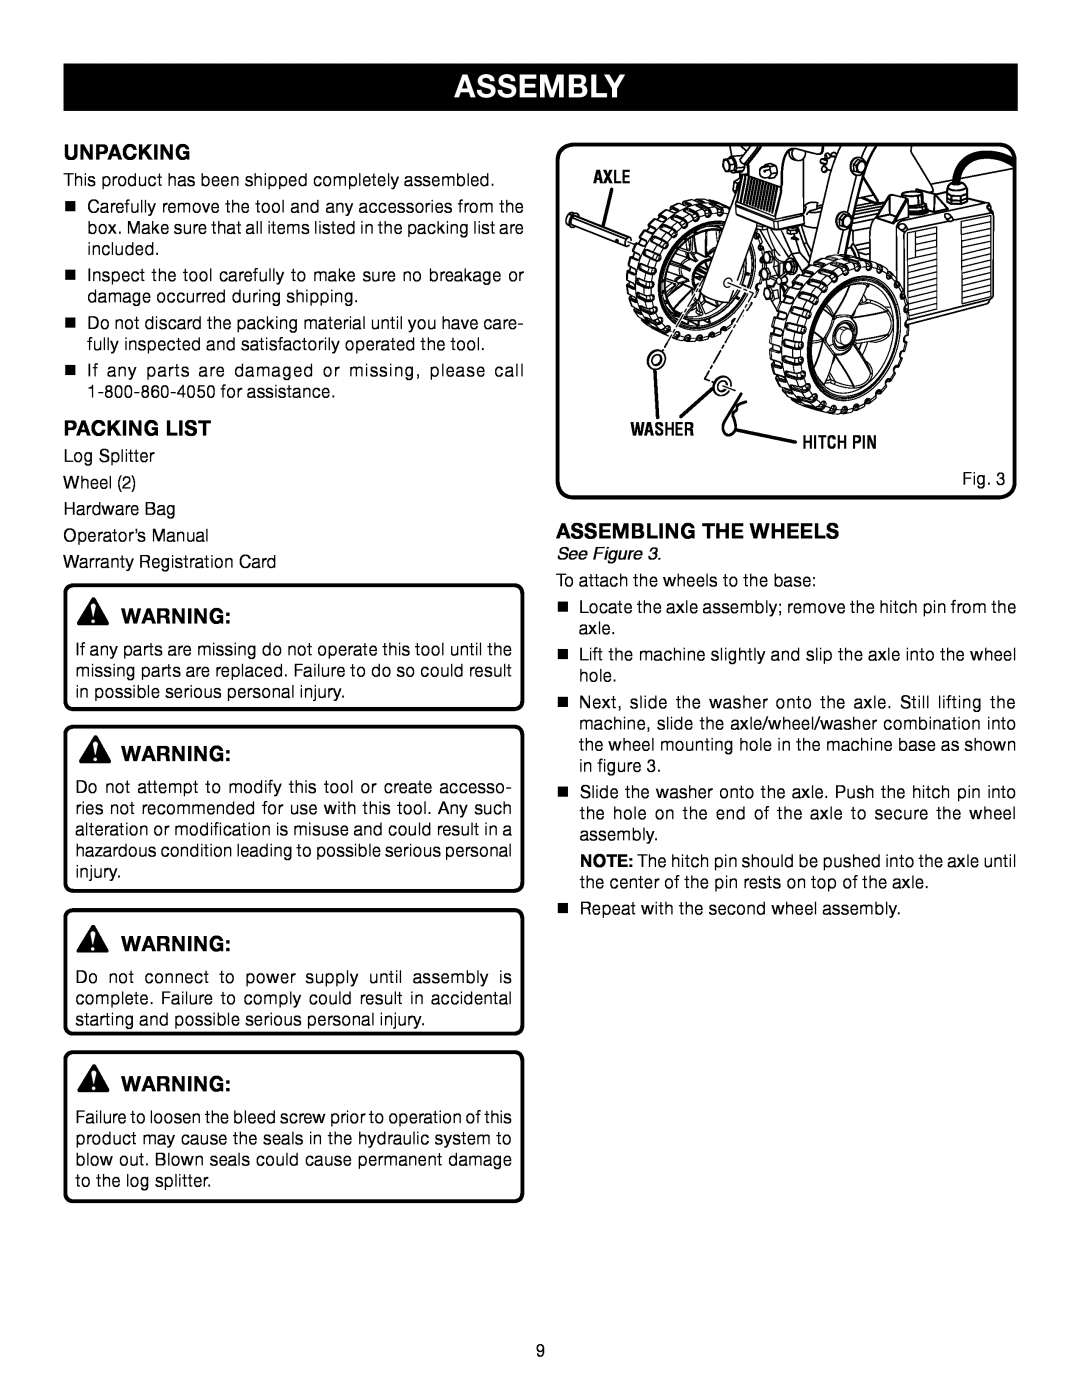 Ryobi Outdoor RY49701 manual Assembly, Unpacking, Packing List, Assembling The Wheels, See Figure 